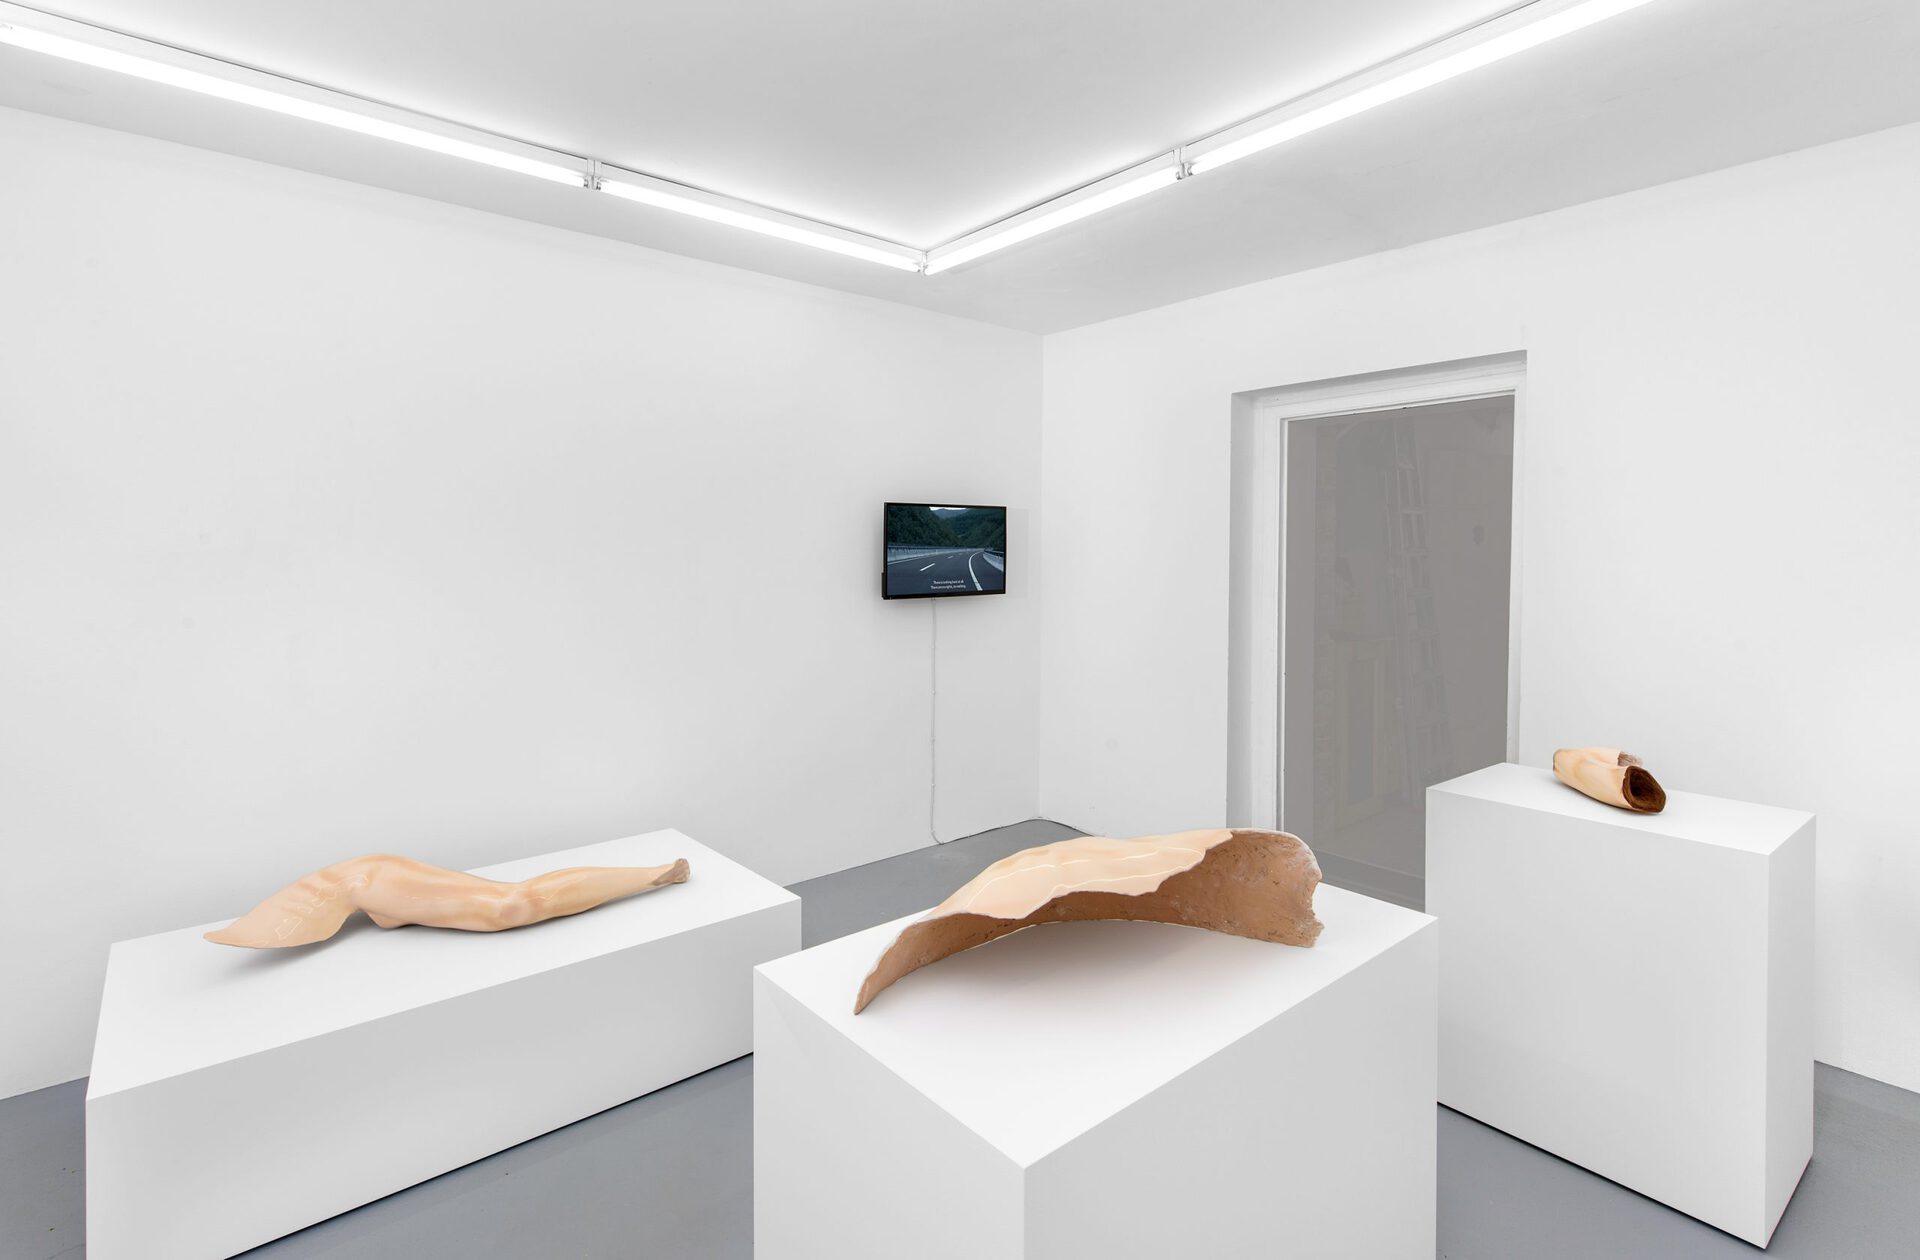 Doruntina Kastrati, "HERE (AIR CARRIES POISON BUT YET WE BREATHE)", installation view at BUNGALOW, 2021, Berlin